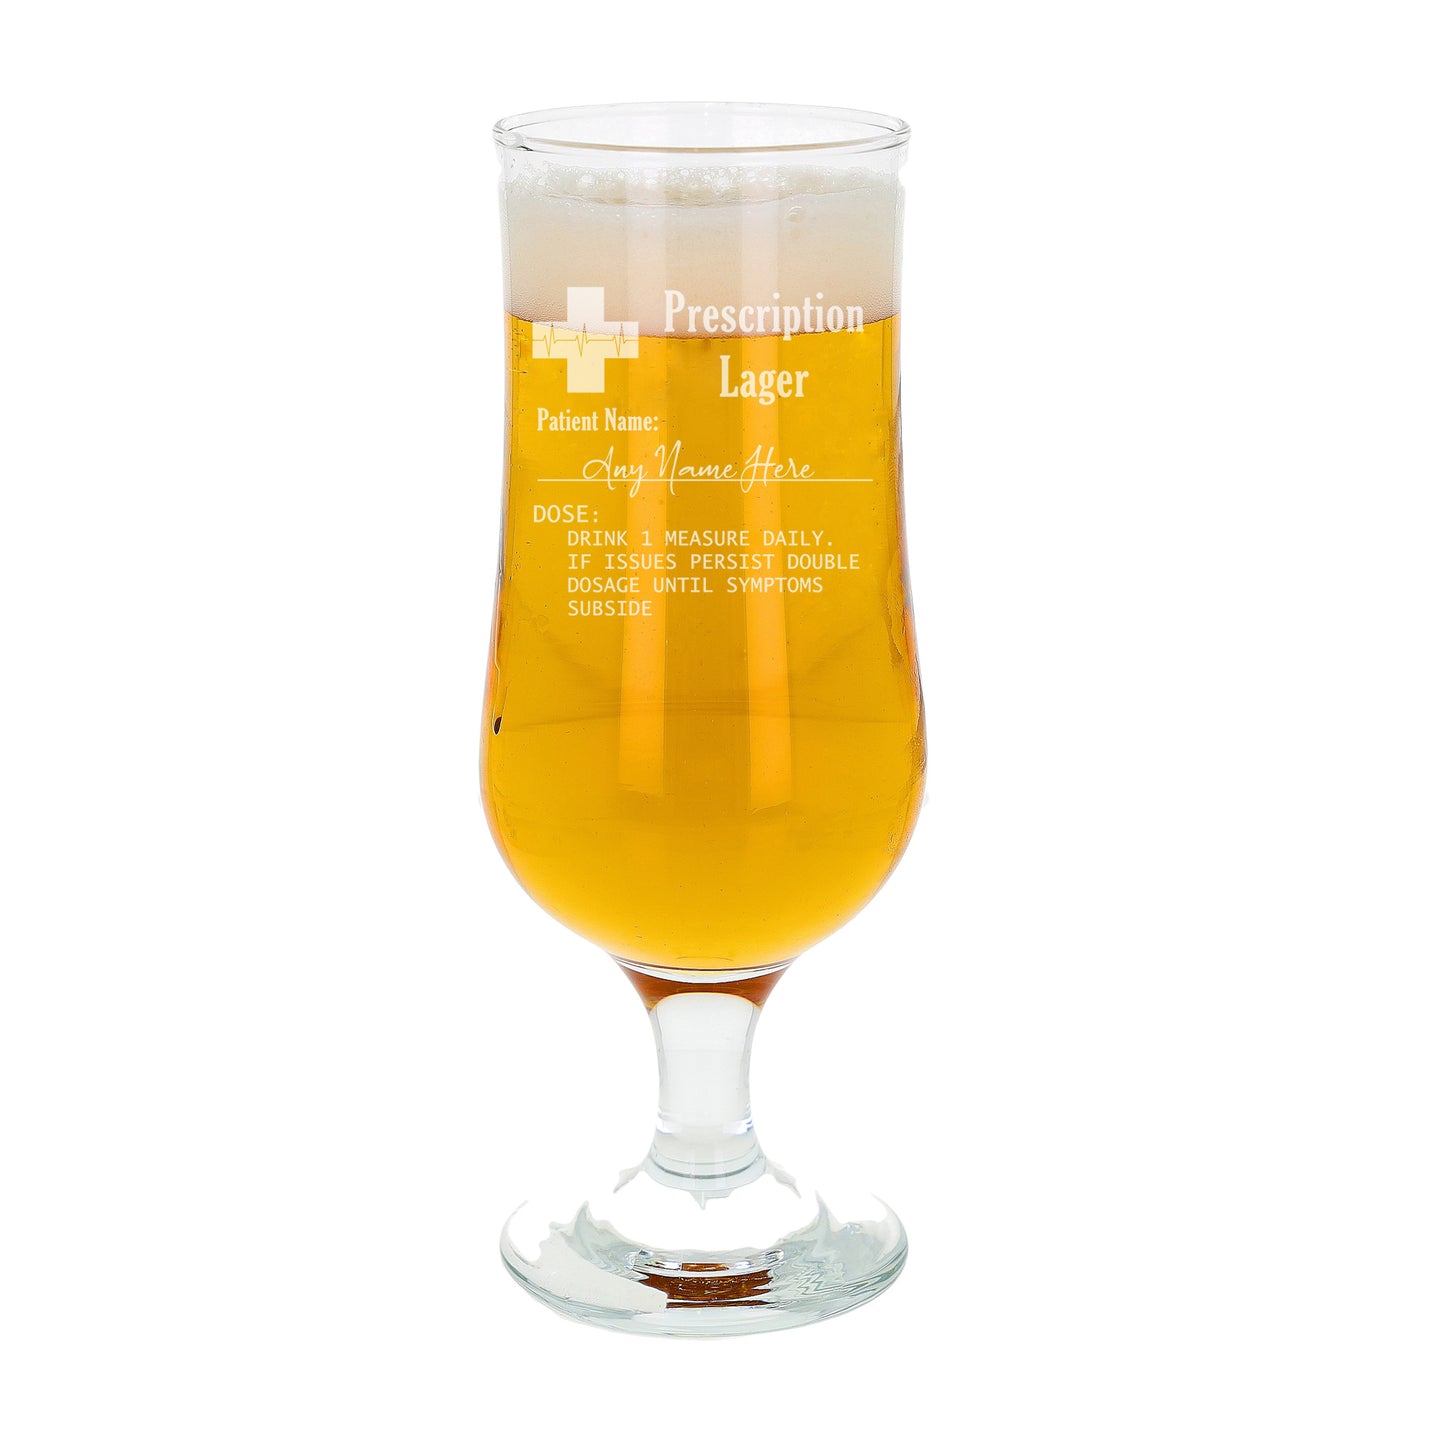 Personalised Engraved ANY GLASS ANY DRINK Prescription Design  - Always Looking Good - Hurricane Pint Glass No Coaster 